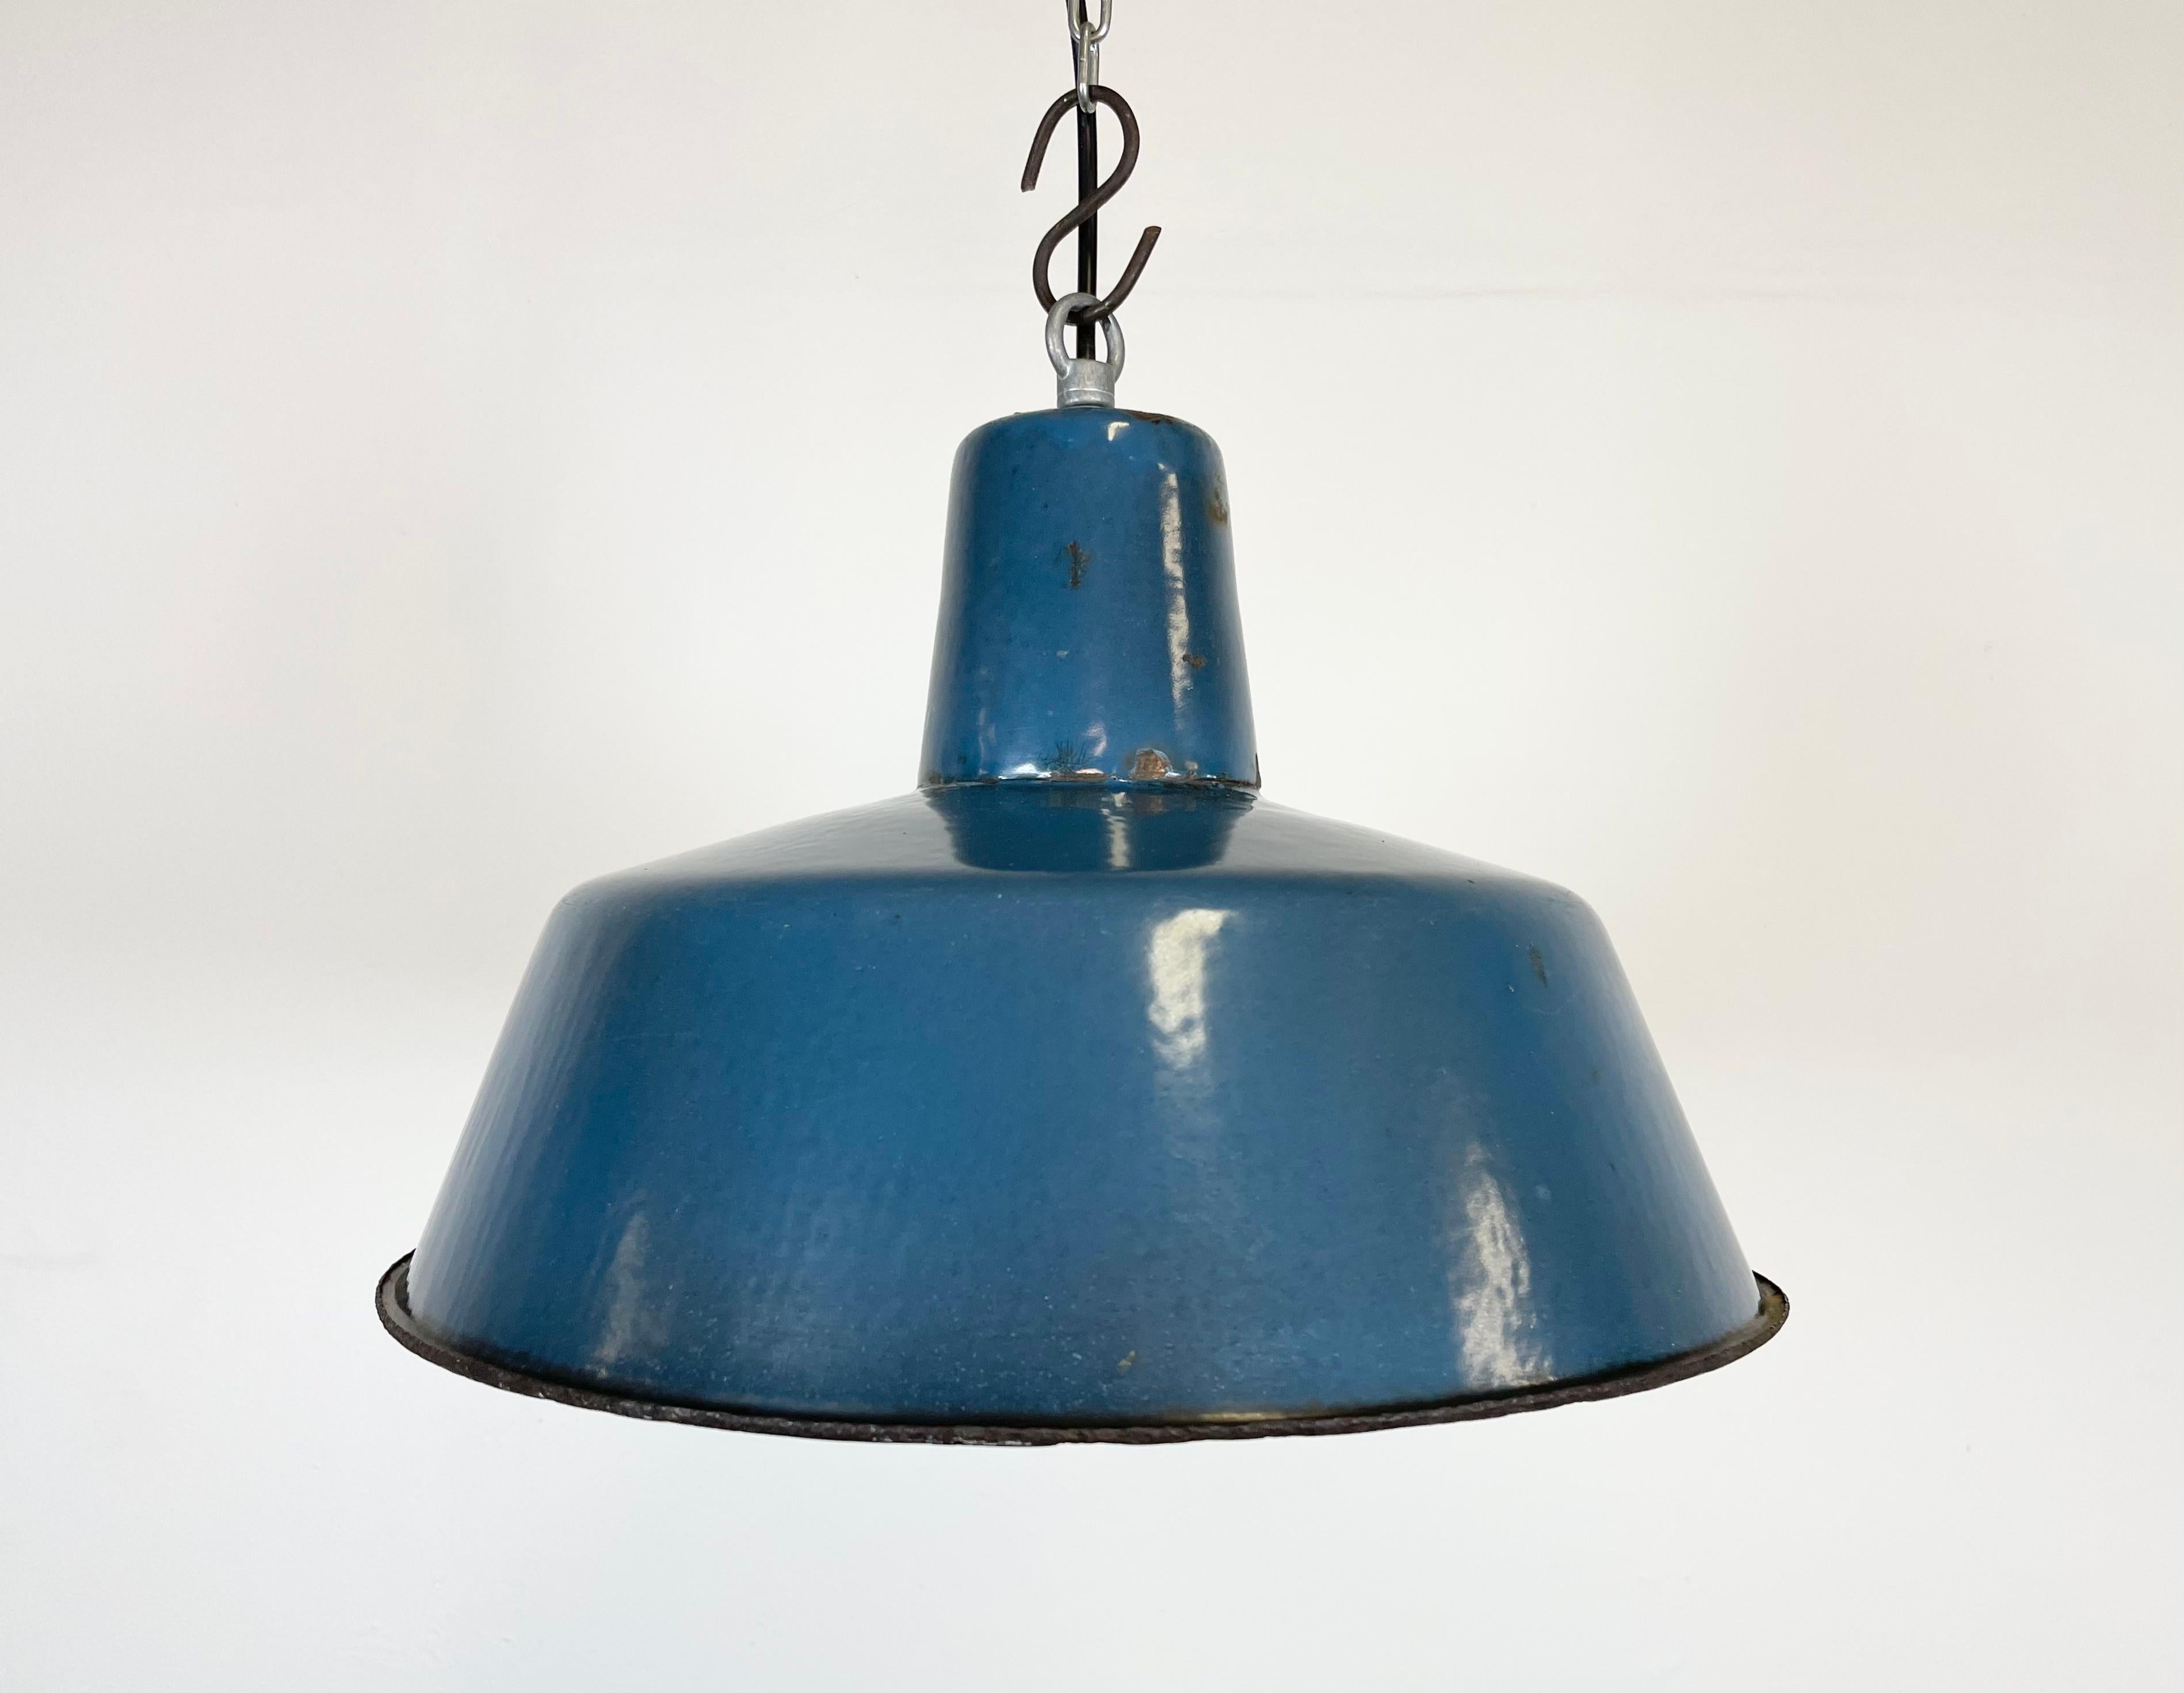 Industrial blue enamel pendant light made in Poland during the 1960s. White enamel inside the shade. Iron top. The bakelite socket requires E 27 light bulbs. New wire. Fully functional. The weight of the lamp is 1,2 kg.